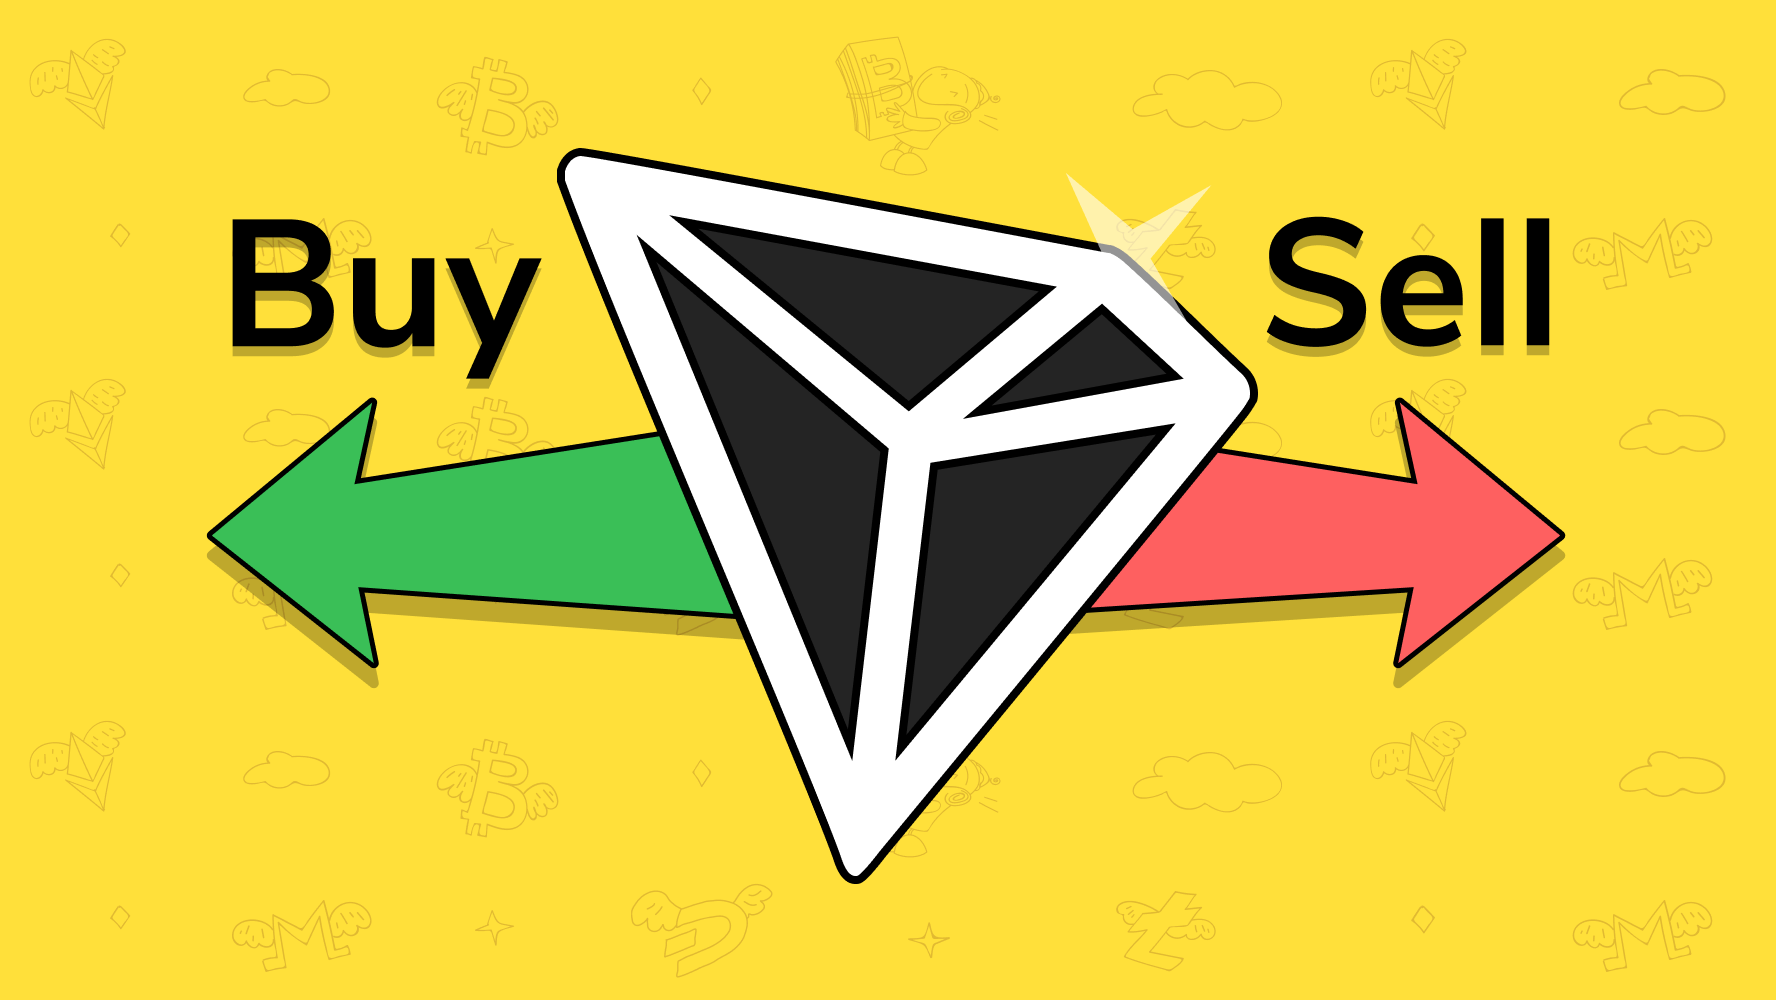 How to Trade TRON - Guide to Buying and Selling TRX Tokens | Coin Guru